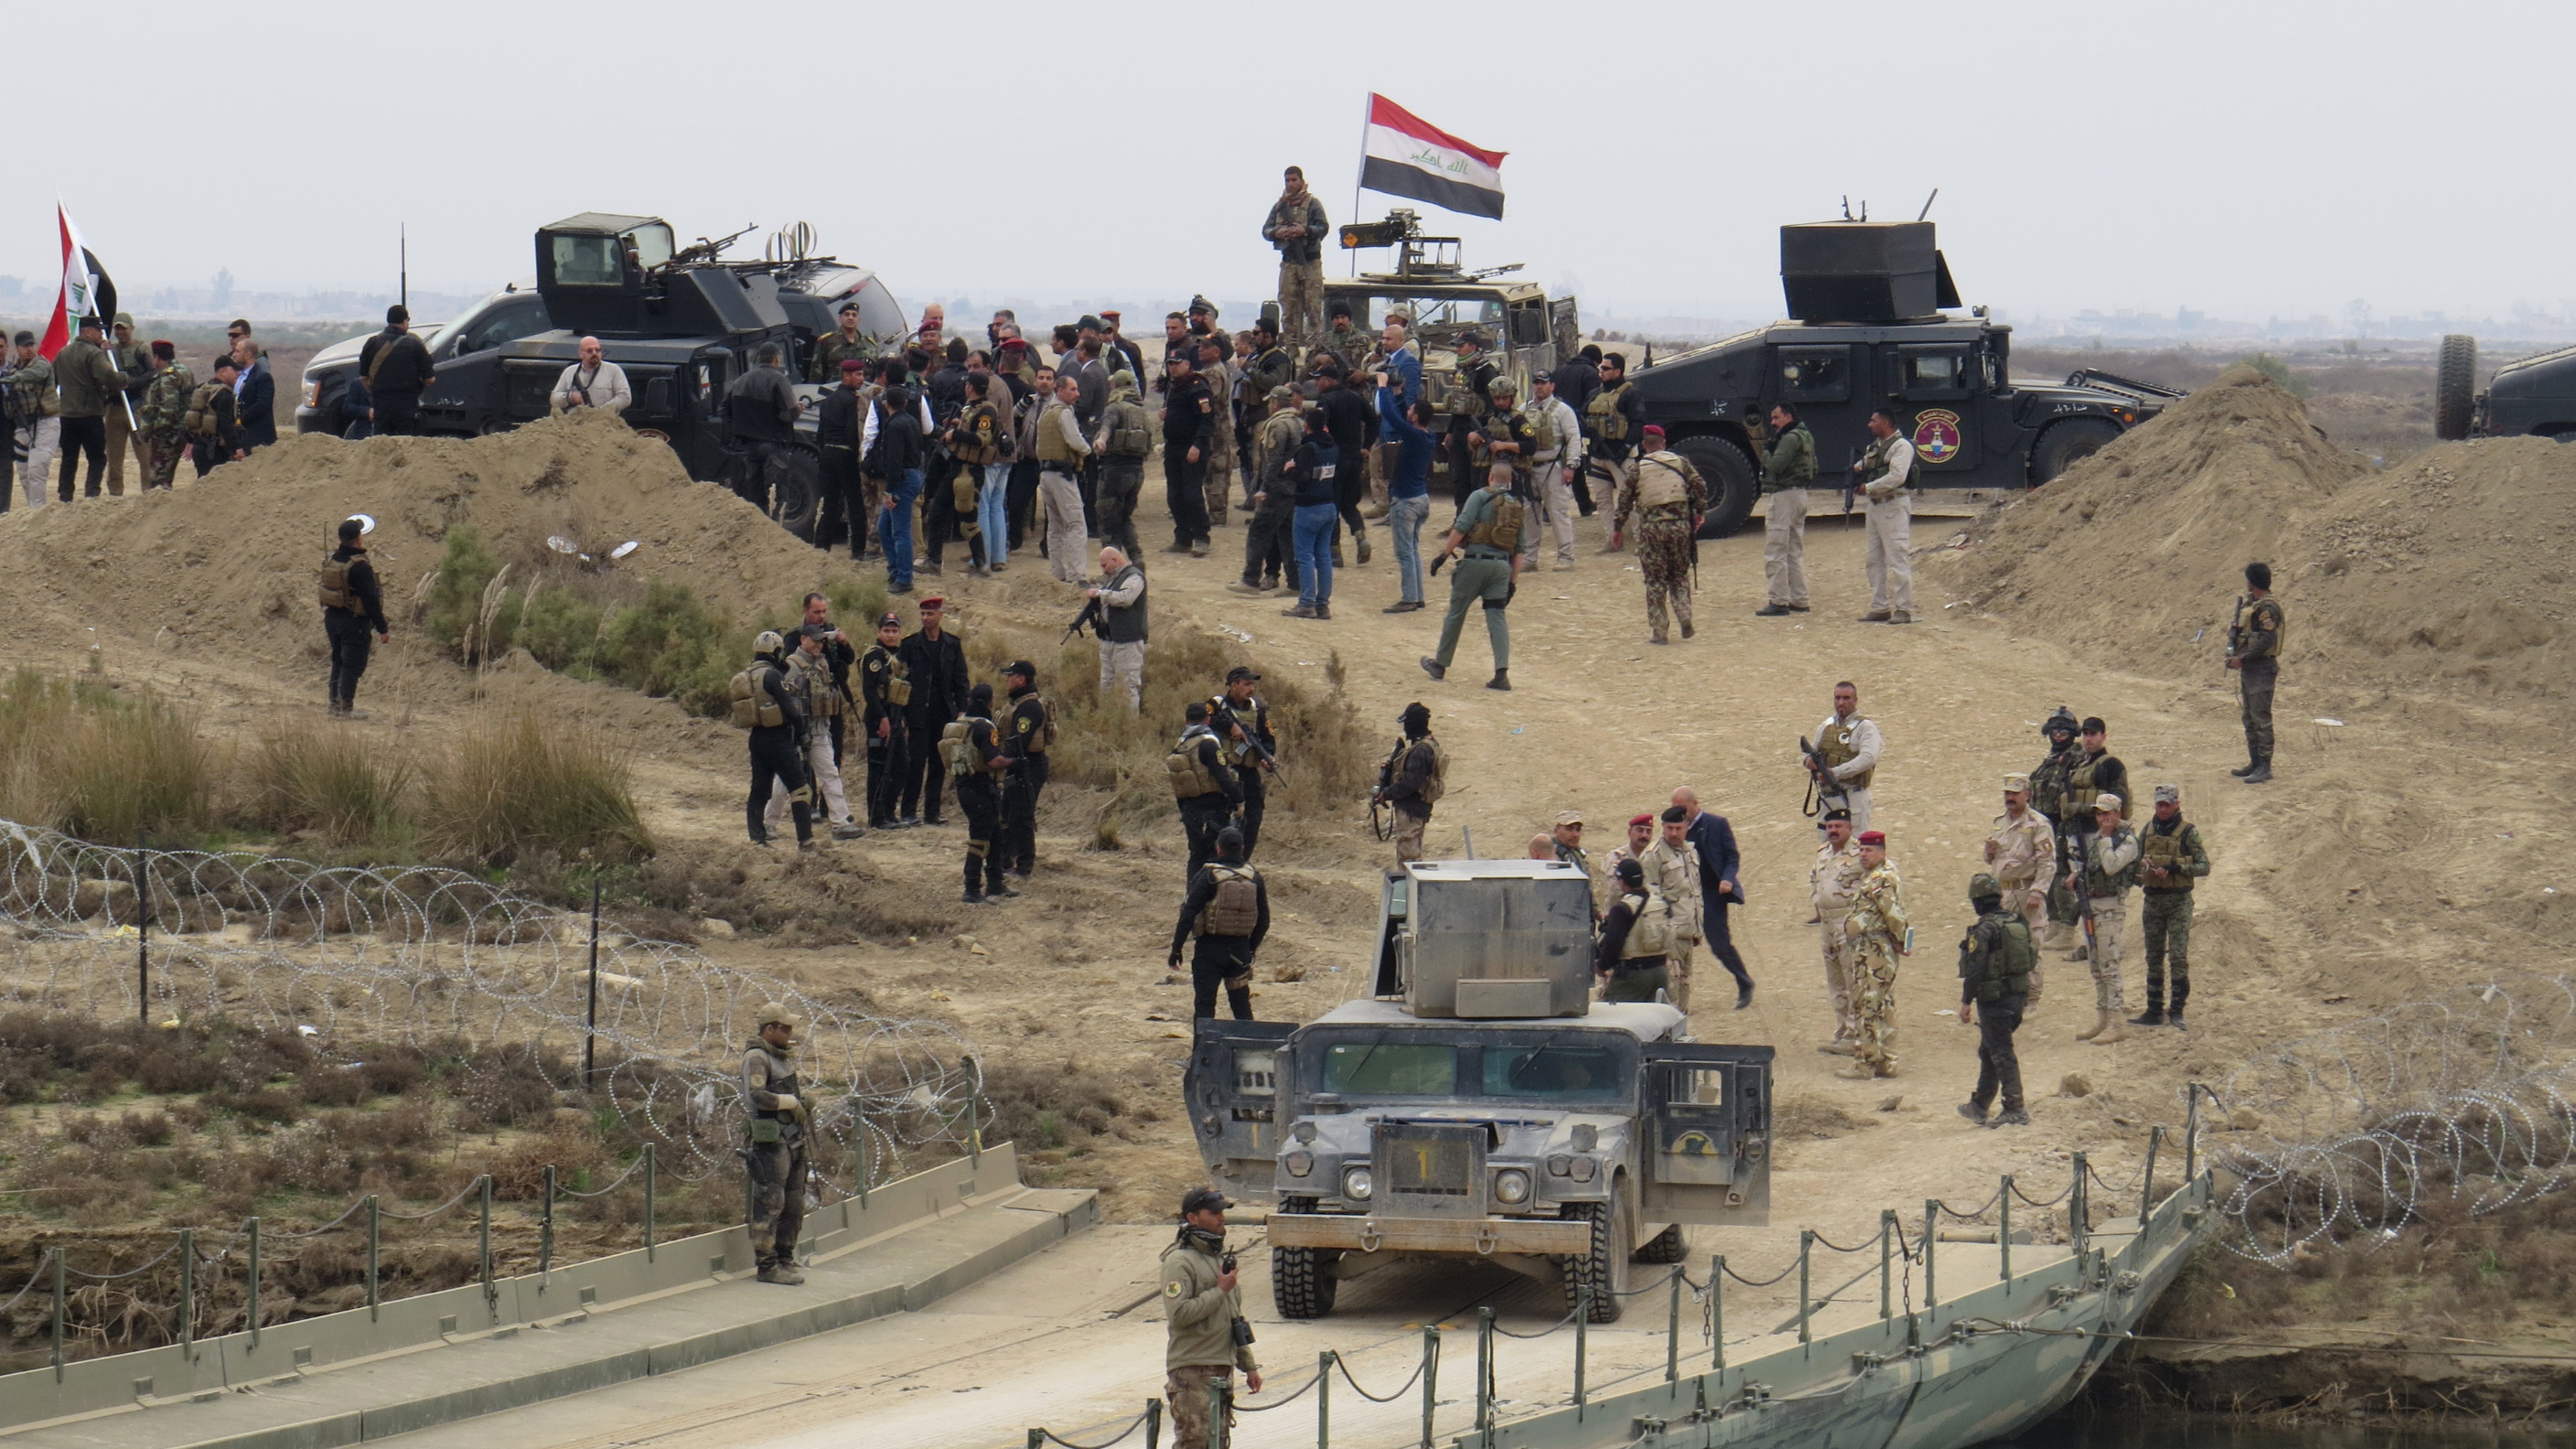 Iraqi security forces gather near a temporary bridge built by the corps of engineers in the Iraqi army south of Ramadi, during a visit by Iraqi Prime Minister Haider al-Abadi on December 29, 2015, after government forces recaptured the city from the Islamic State jihadist group. Abadi visited Ramadi, which lies around 100 kilometres (60 miles) west of Baghdad and is the capital of the province of Anbar, a day after federal forces announced the liberation of the city from the Islamic State group, clinching a landmark victory.  AFP PHOTO / STR / AFP / STR        (Photo credit should read STR/AFP/Getty Images)